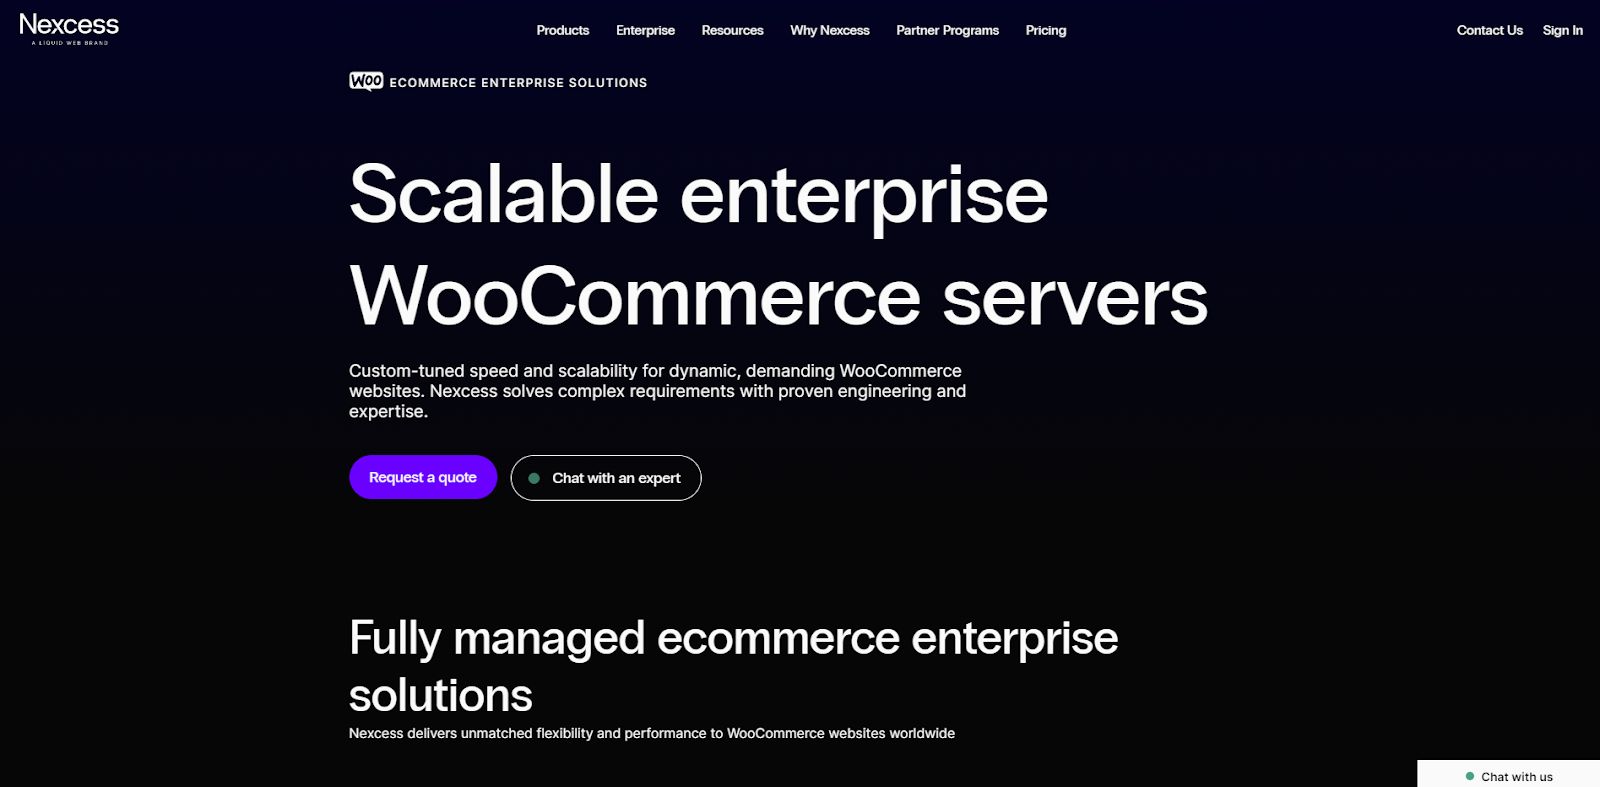 Nexcess offers the best WooCommerce hosting plans, which include technical support, excellent website speeds, and strong security.